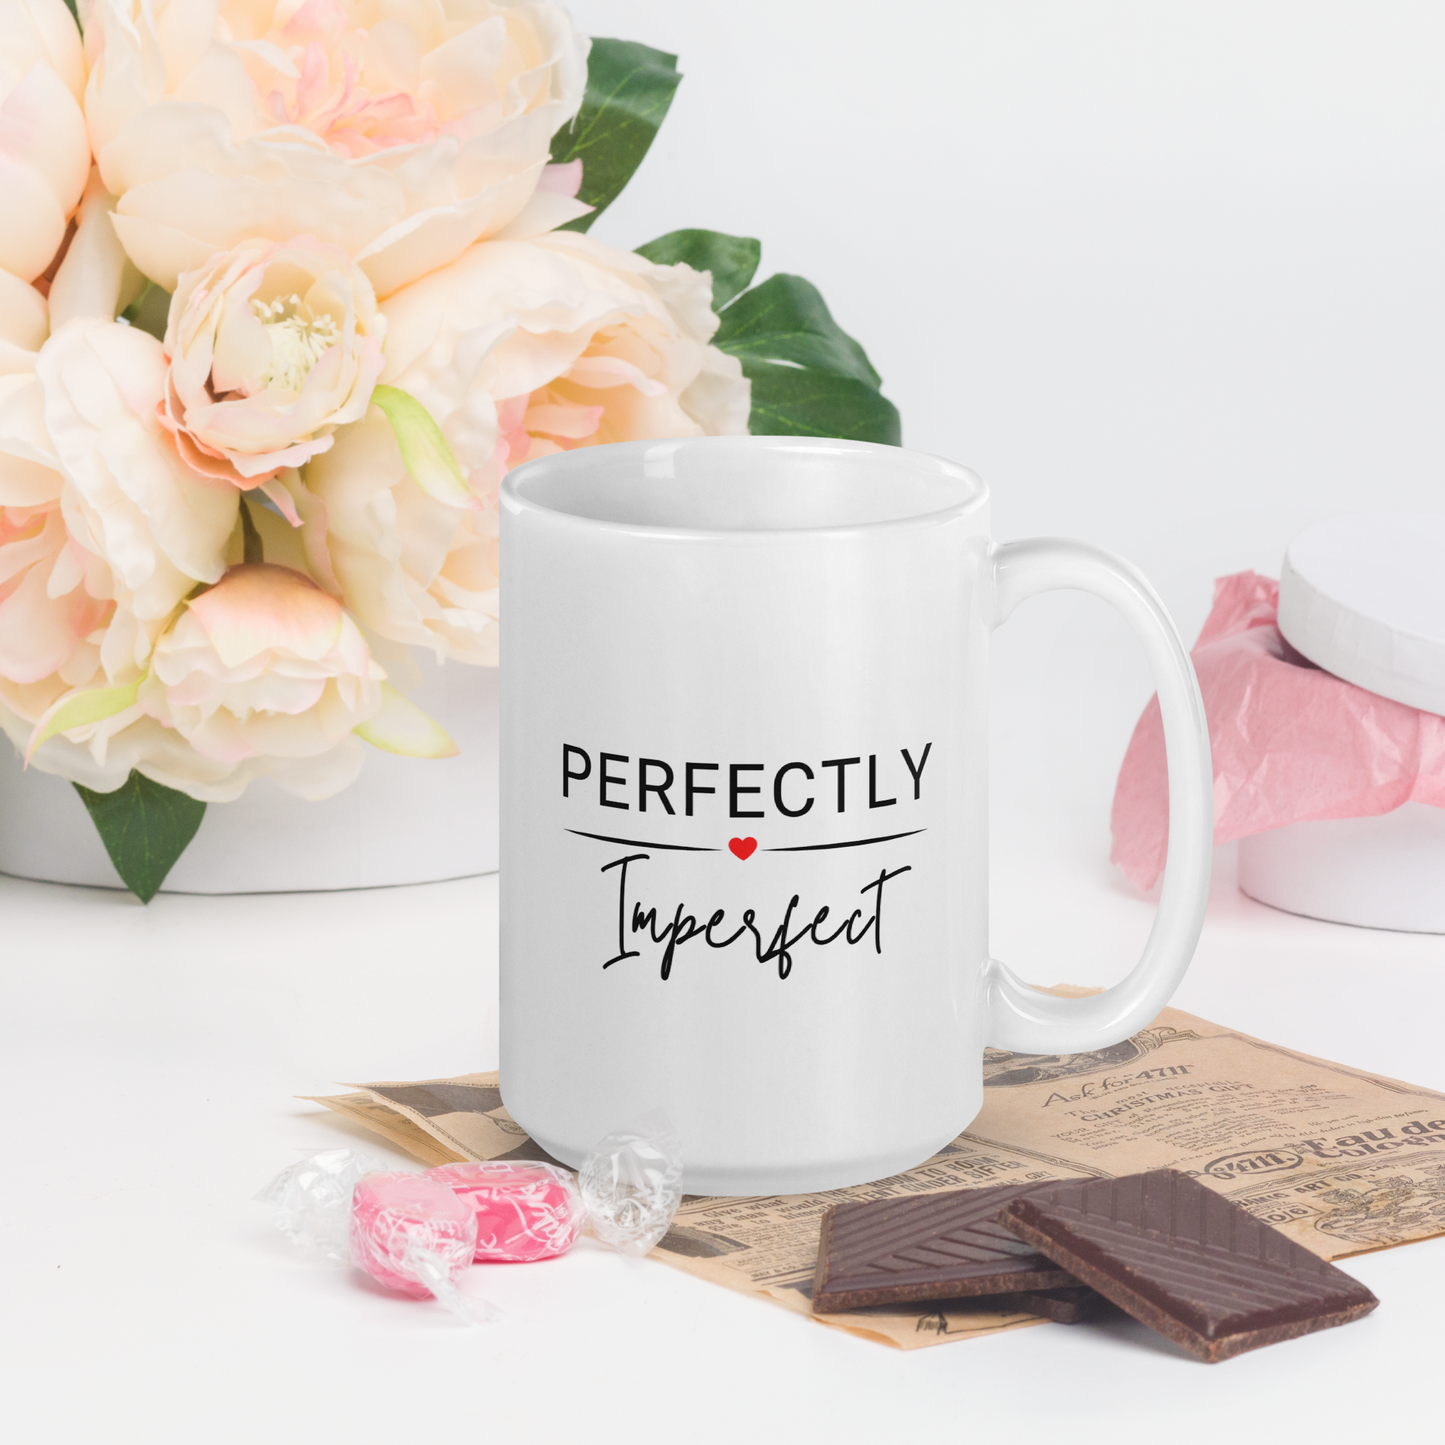 Embrace Your Authenticity with our PERFECTLY Imperfect Women's Ceramic Coffee Mug